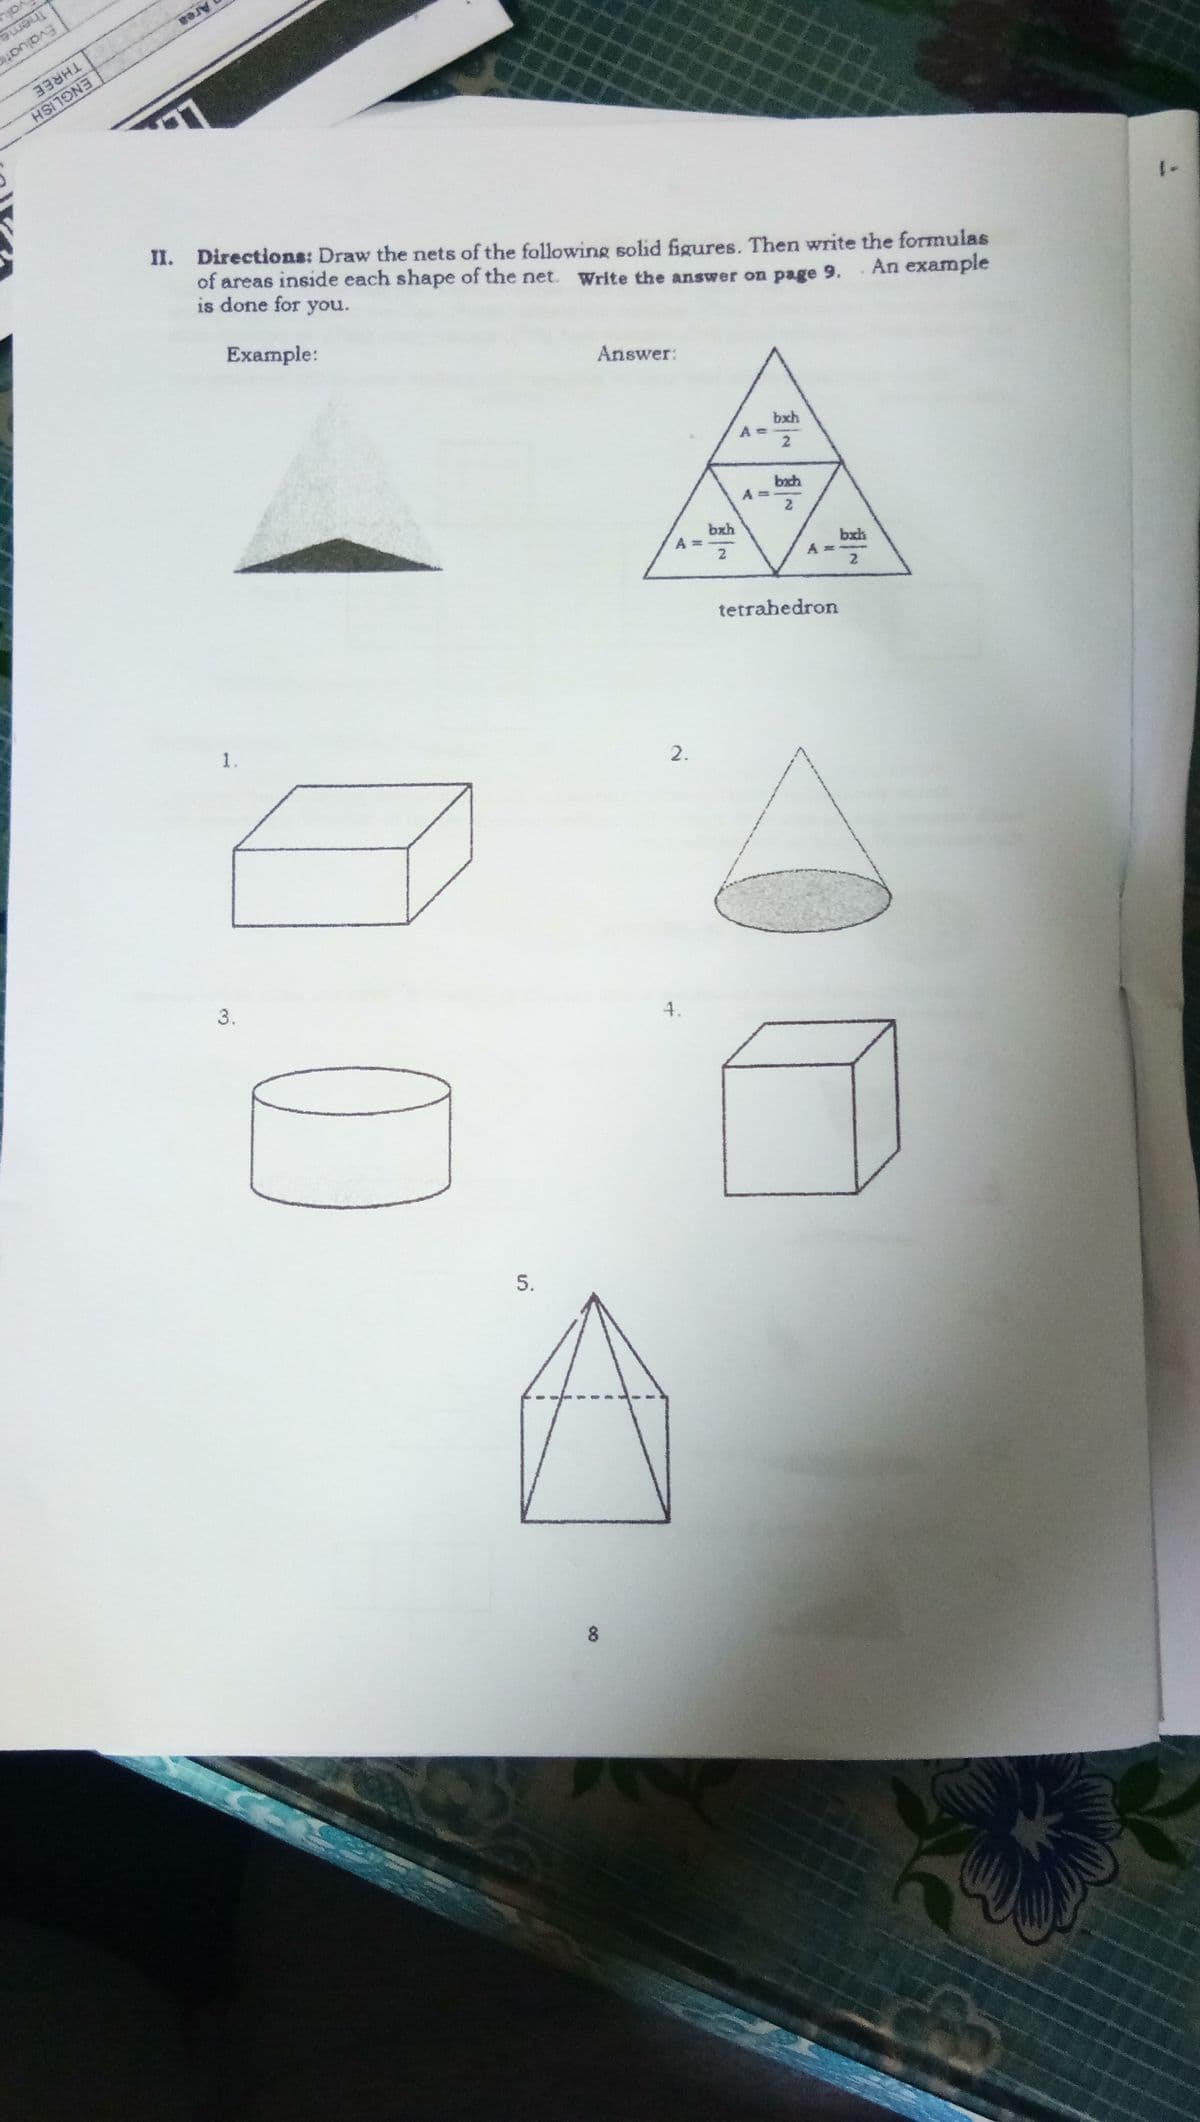 Area
Theme
Evaluatic
THREE
II. Directions: Draw the nets of the following solid figures. Then write the formulas
of areas inside each shape of the net. Write the answer on page 9.
ENGLISH
An example
Answer:
is done for you.
bxh
A
Example:
2
bxh
A%3D
2
bxh
bxh
2
tetrahedron
2.
1.
4.
3.
8
5.
